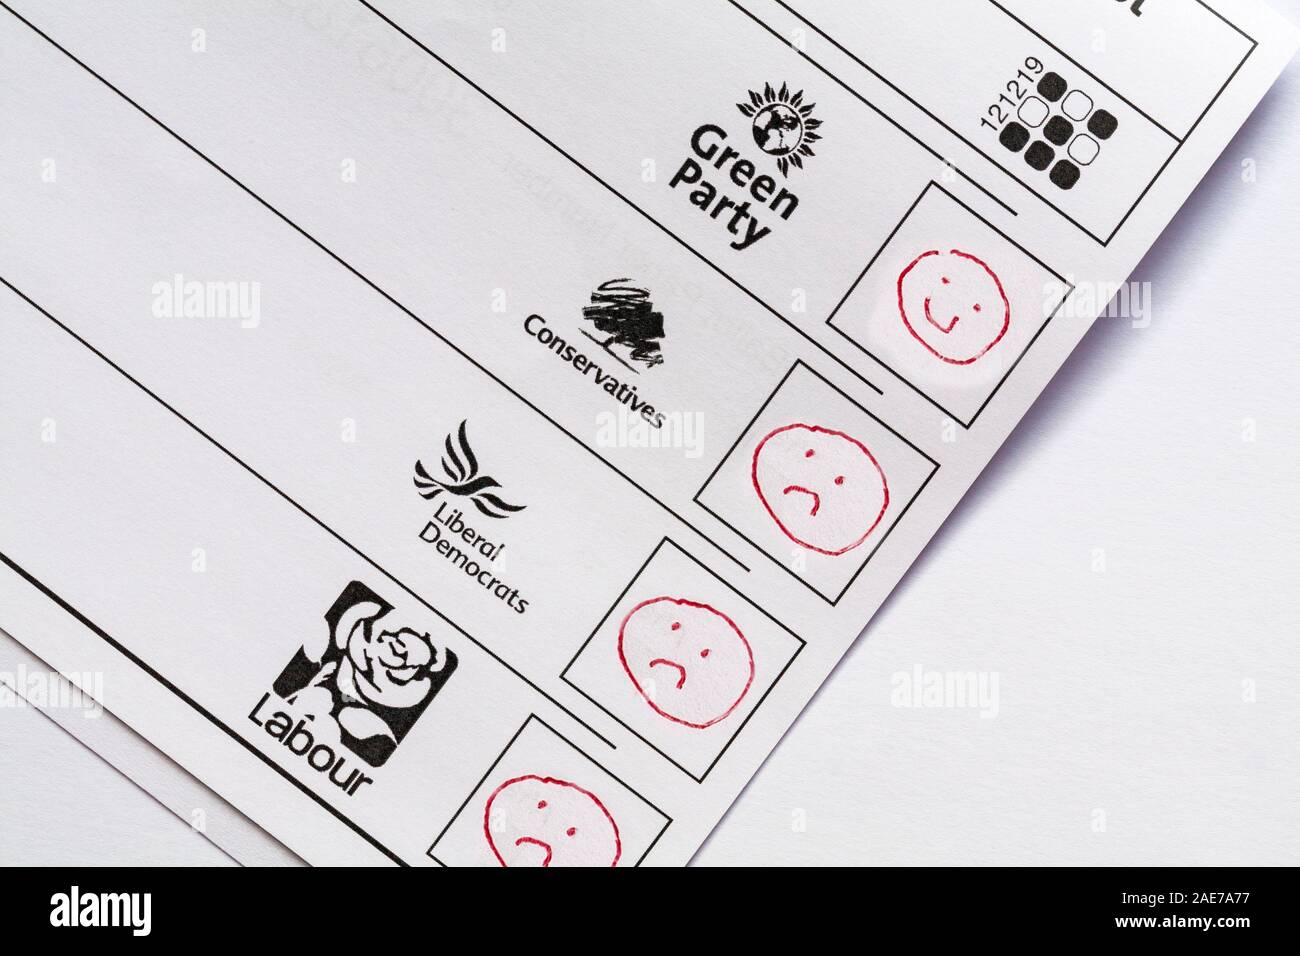 Spoiled spoilt ballot paper for forthcoming Parliamentary Election 2019 in UK - wasted vote smiley face emoji against Green Party with unhappy face Stock Photo